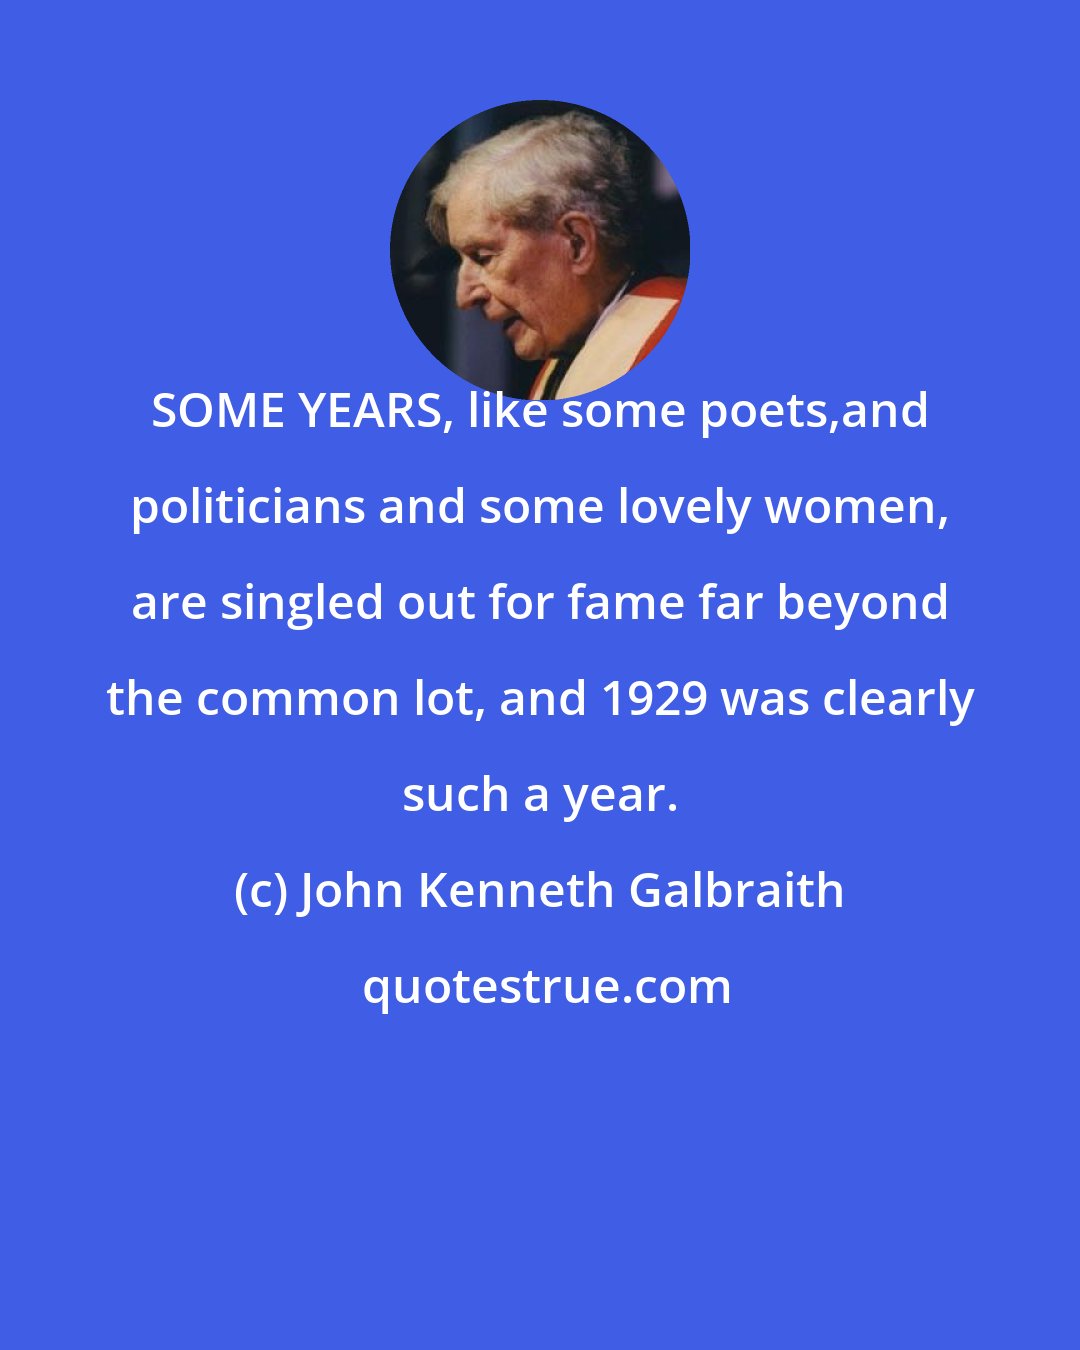 John Kenneth Galbraith: SOME YEARS, like some poets,and politicians and some lovely women, are singled out for fame far beyond the common lot, and 1929 was clearly such a year.